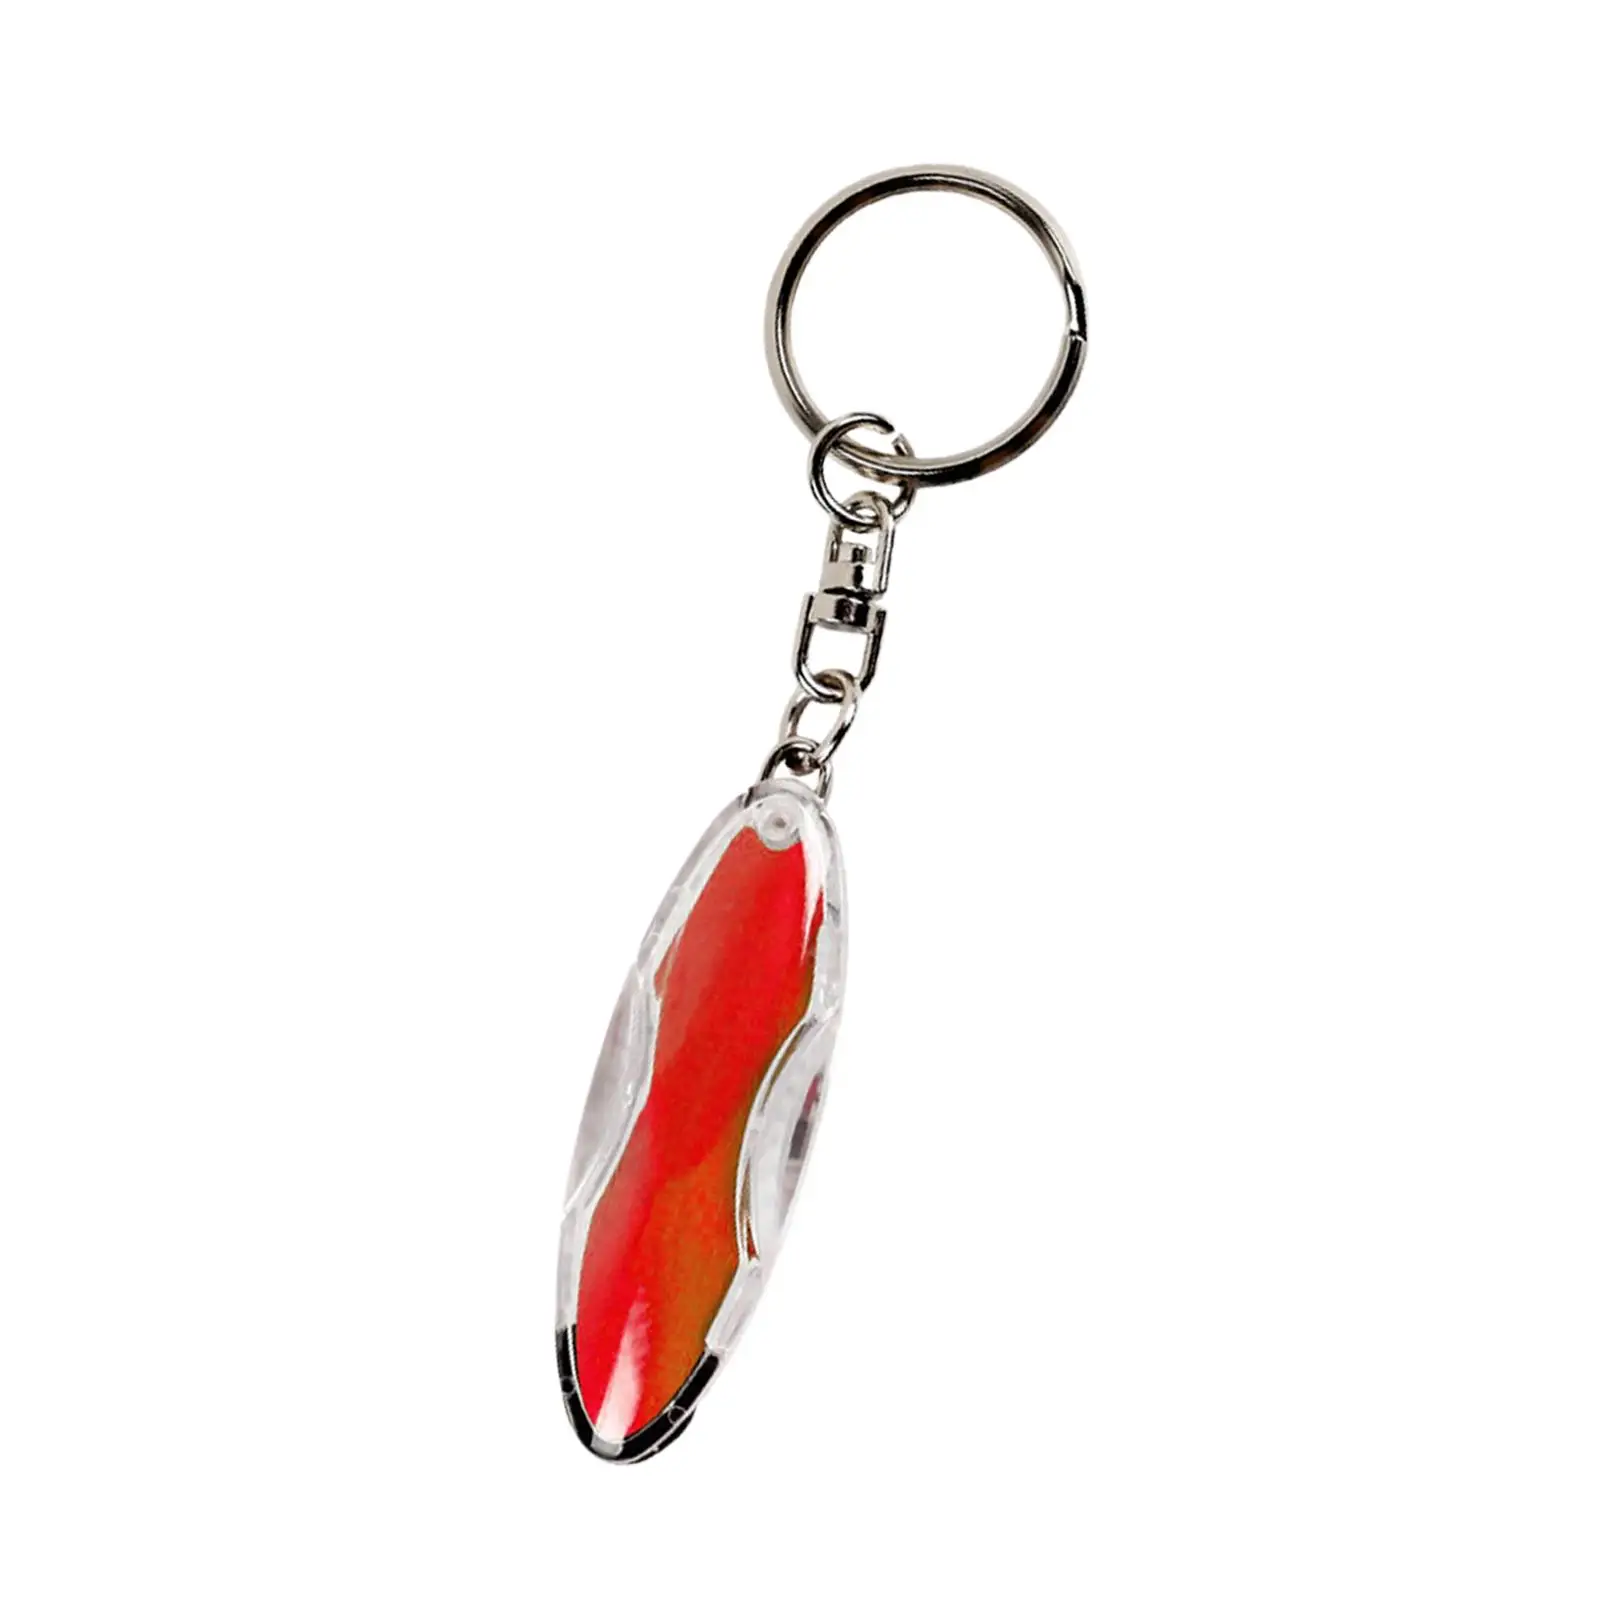 Portable Anti Static Keychain, Keyring Static Shock Resin Conductive Tool Best